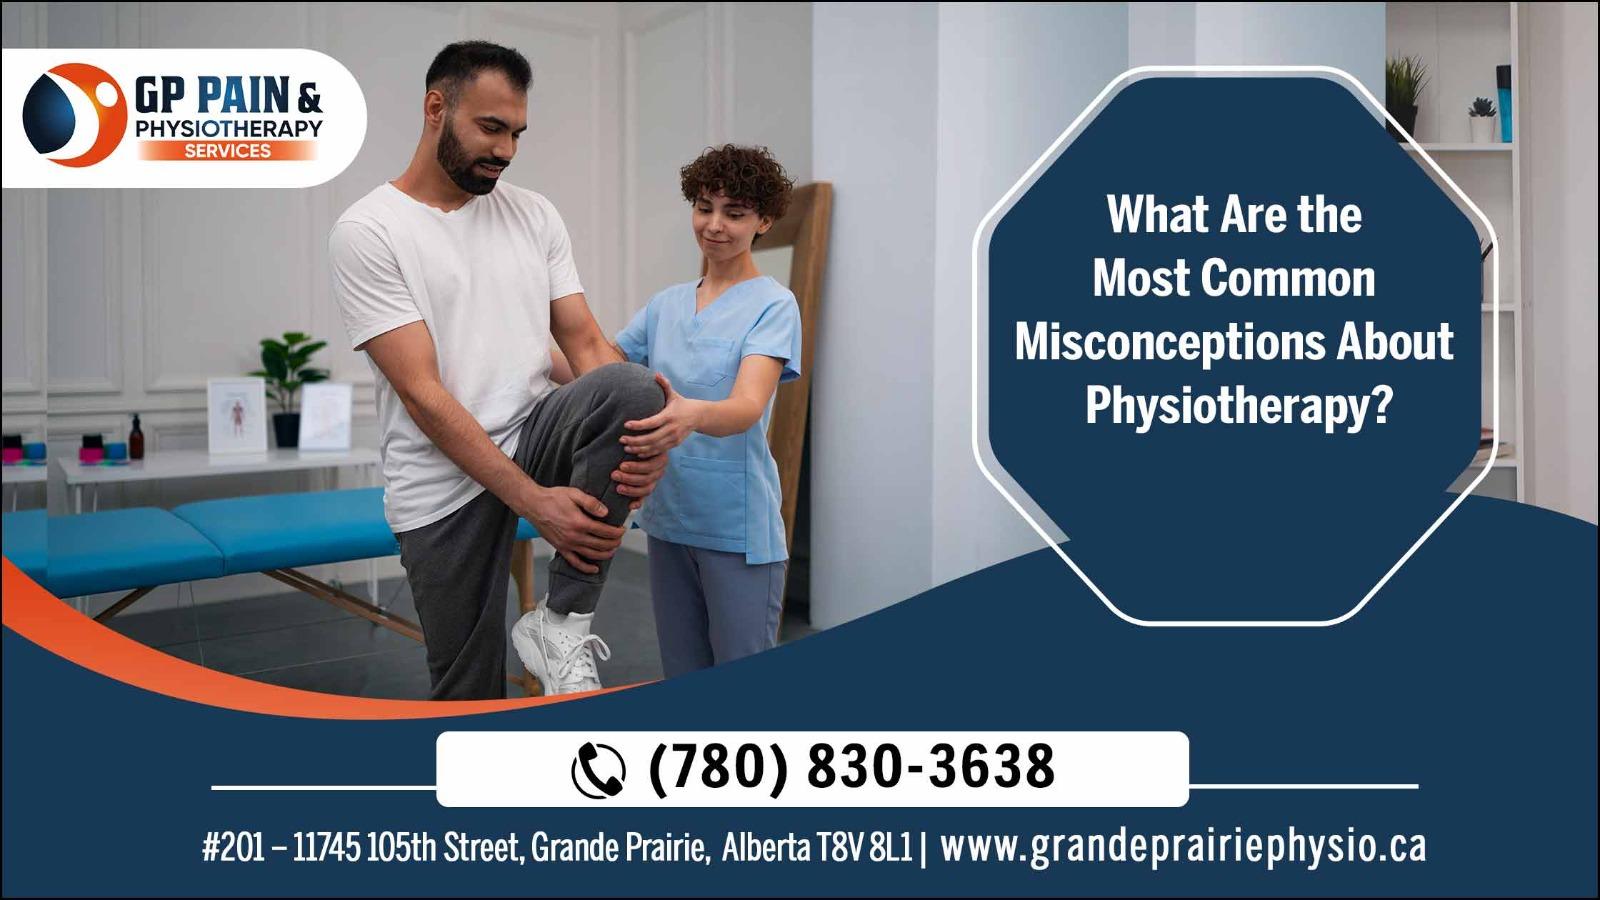 What Are the Most Common Misconceptions About Physiotherapy